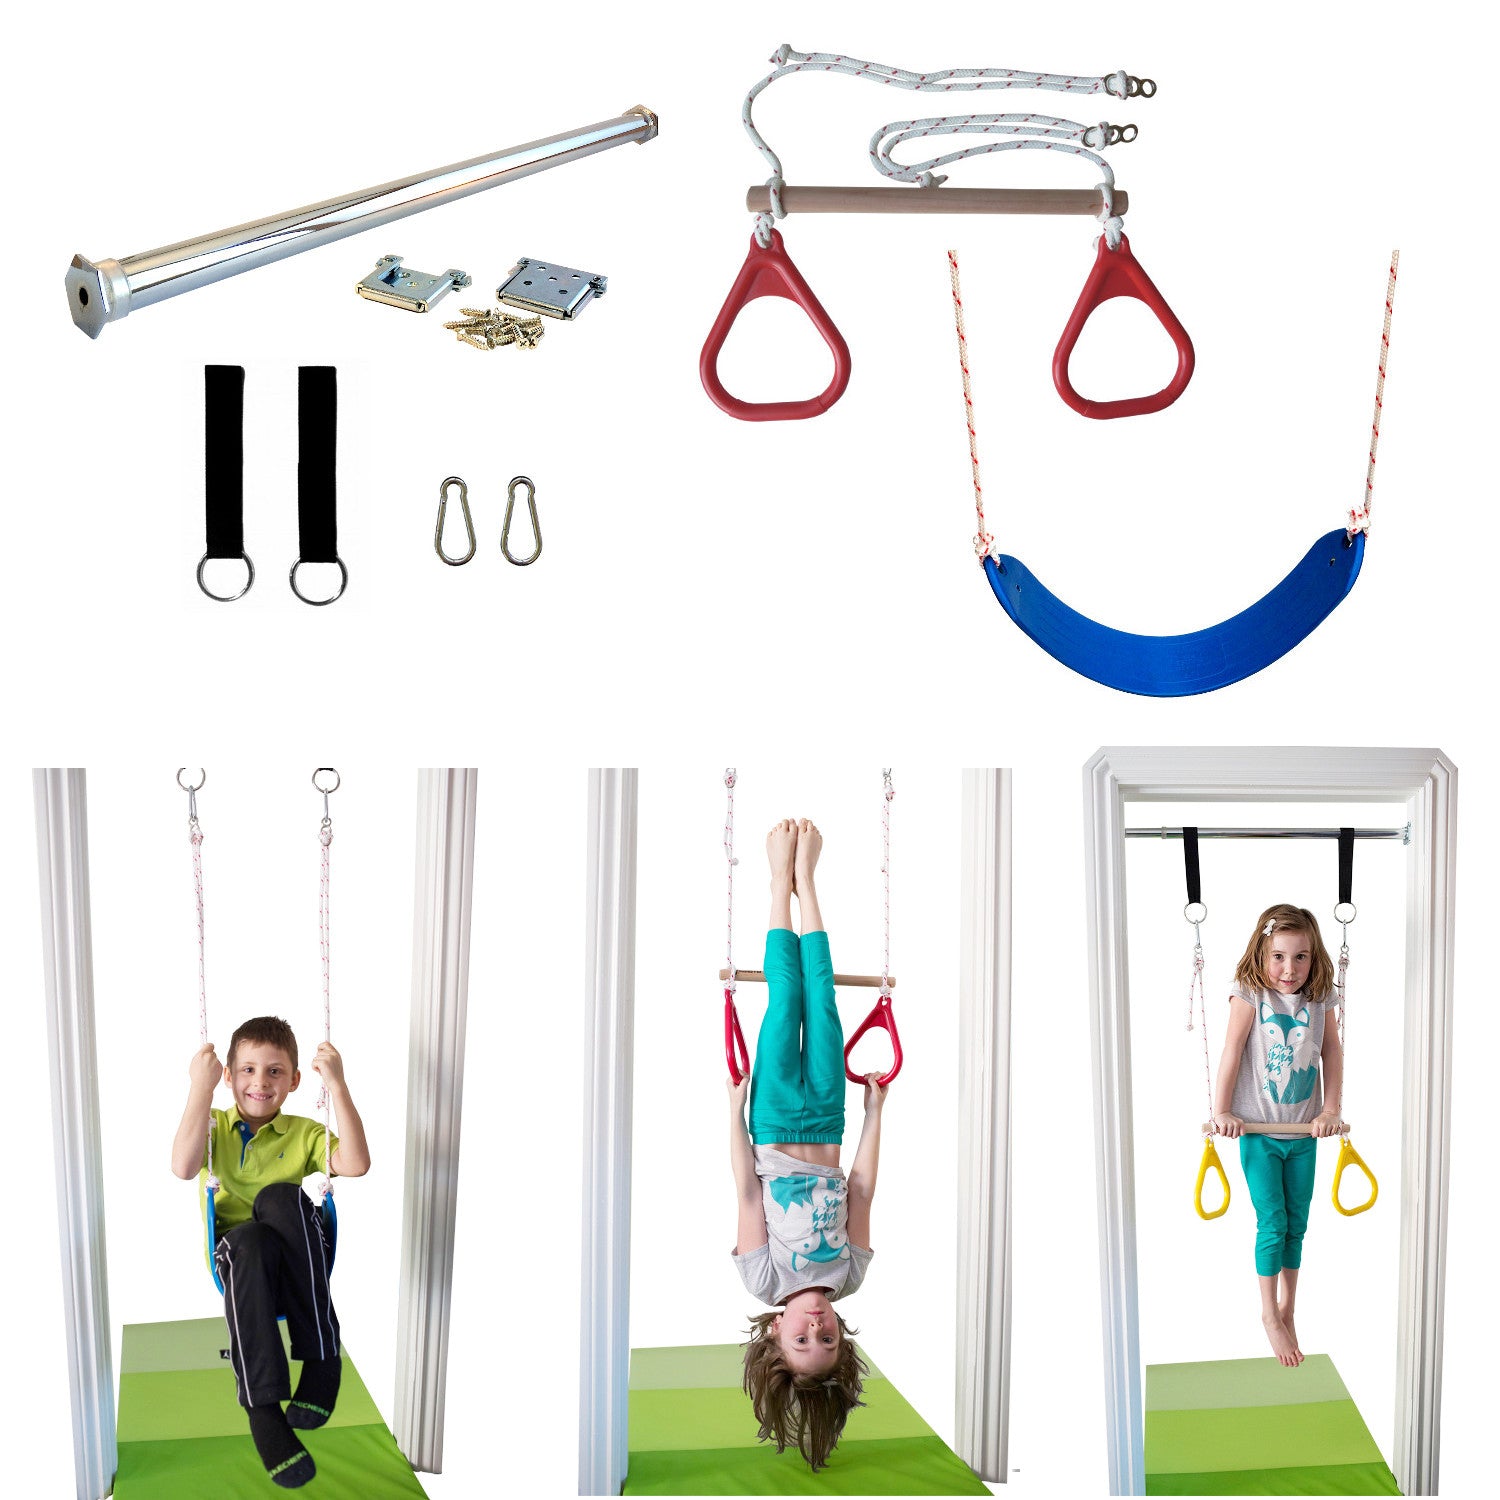 Doorway swing for kids set by DreamGYM. The kit includes a door bar to support the swing. Trapeze bar and gymnastic rings combo, classic swing.